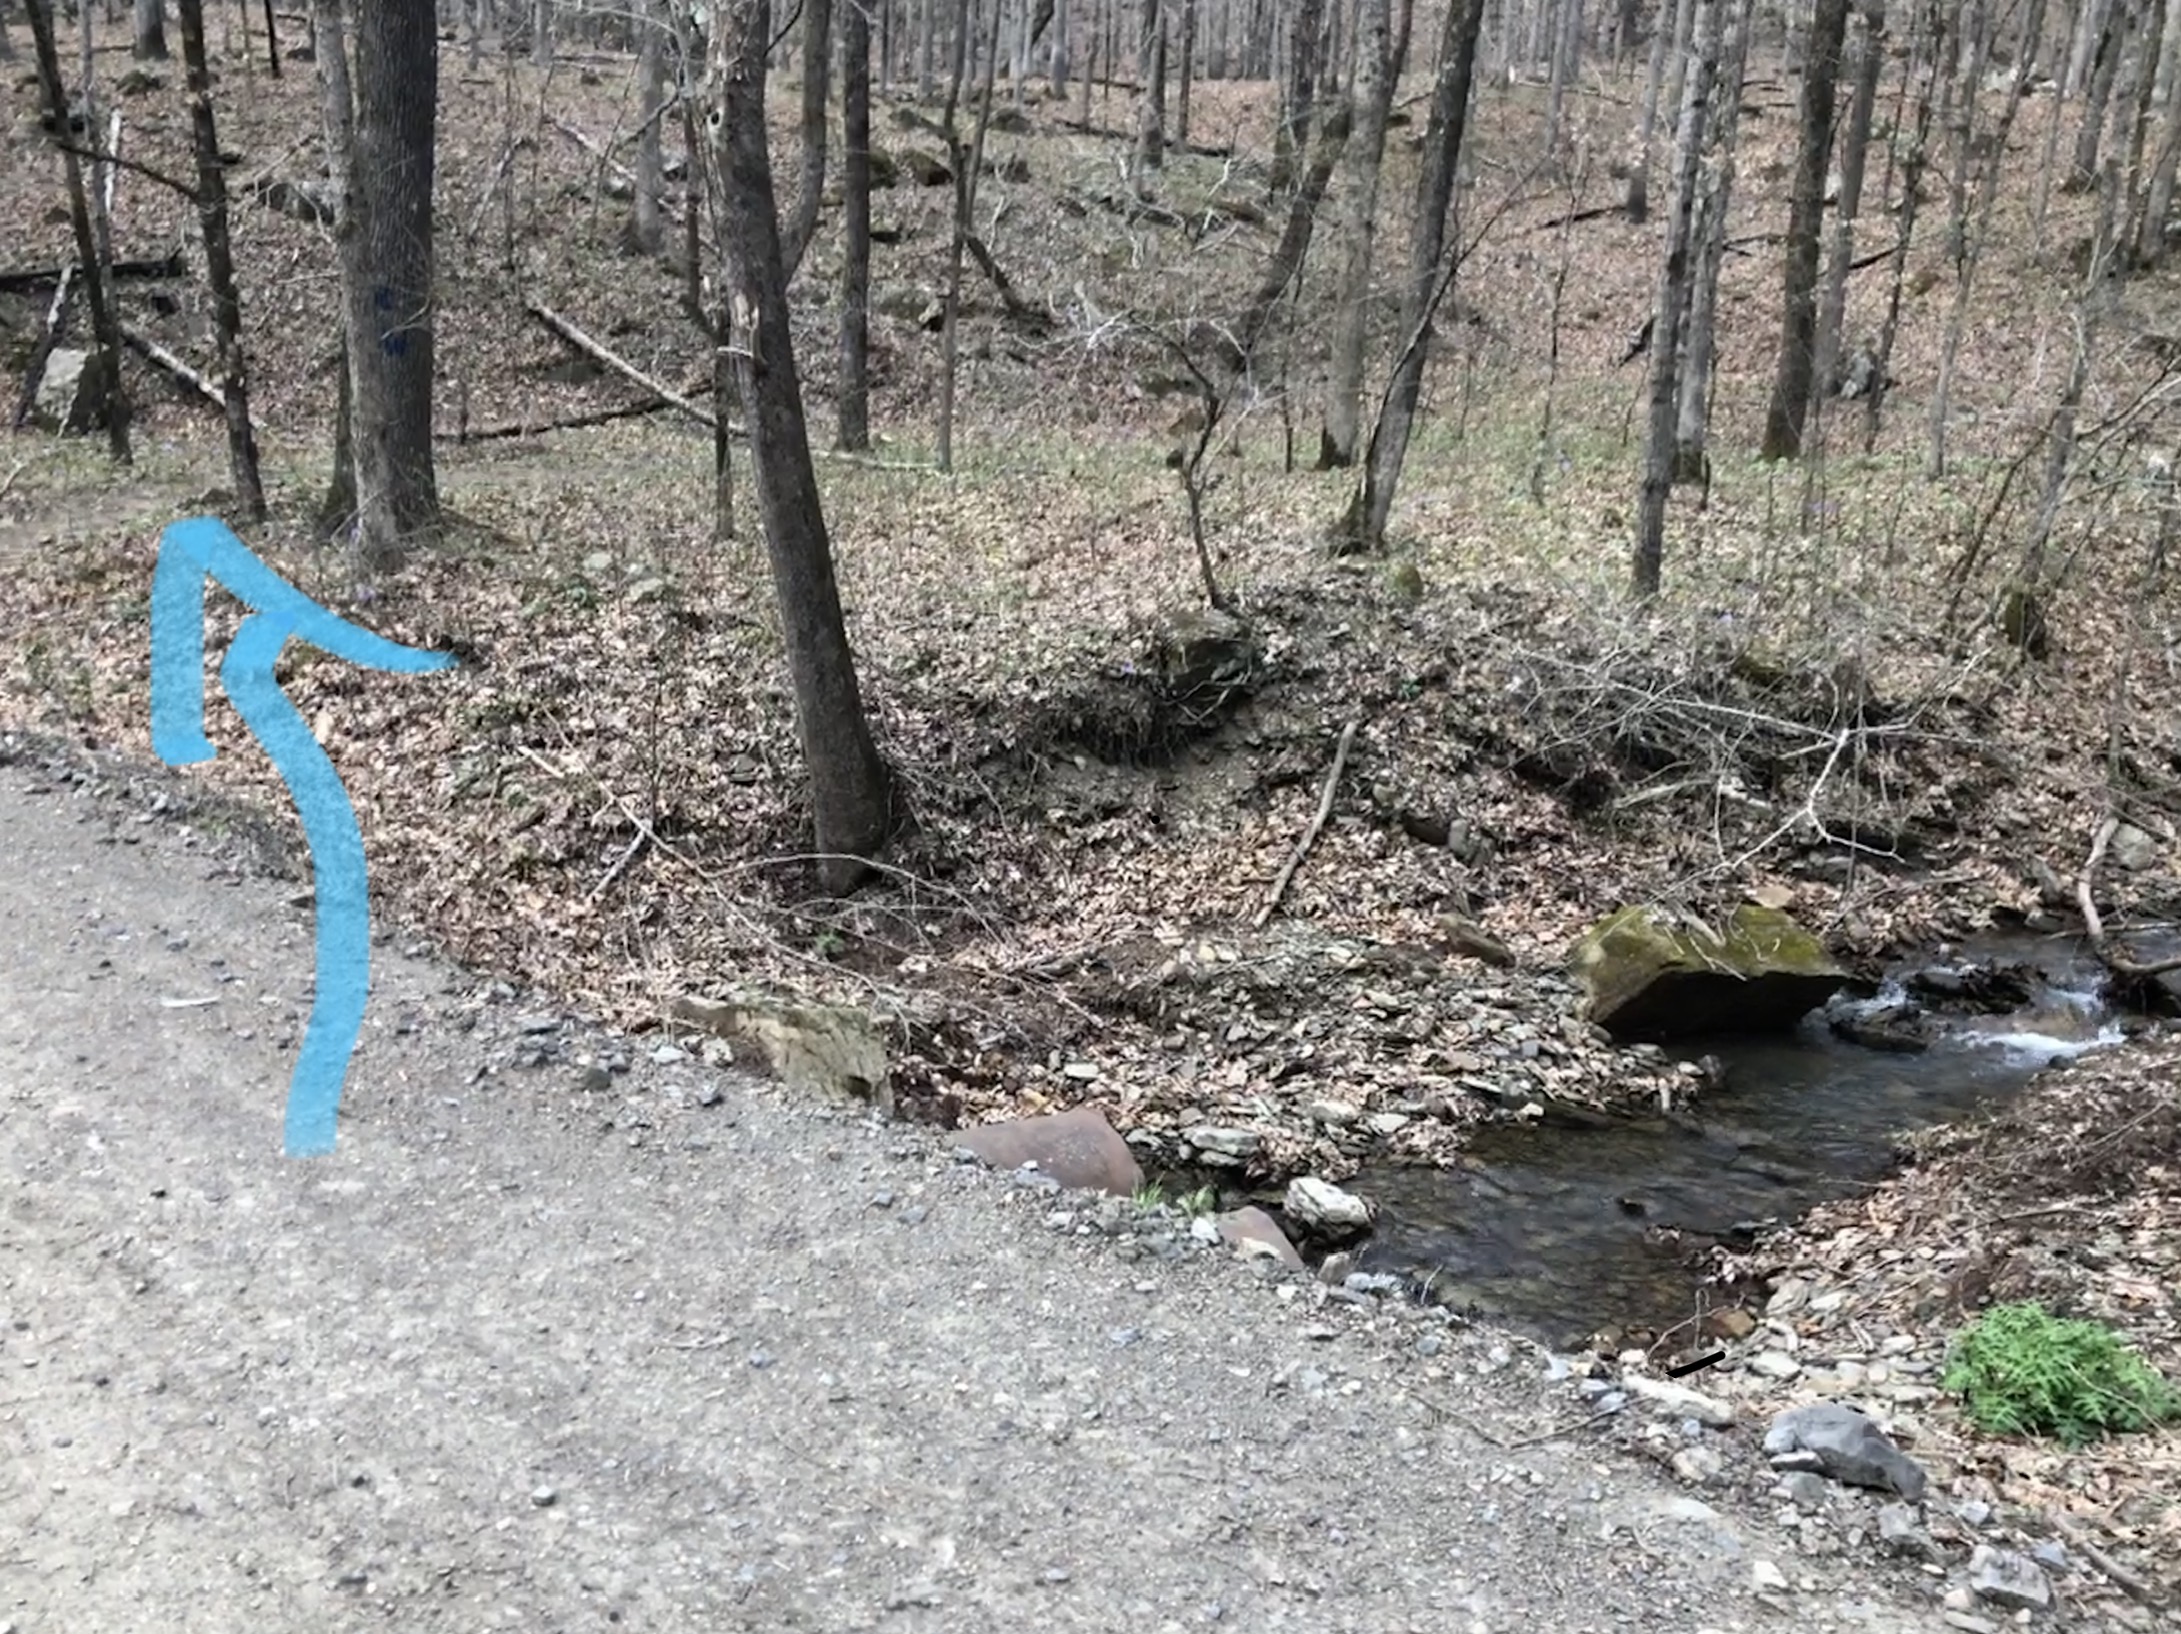 The Terry Keefe Falls trail starts on east side of Falling Creek Road and follows a tributary to the falls. From the road, the trail starts on the left side of the tributary.